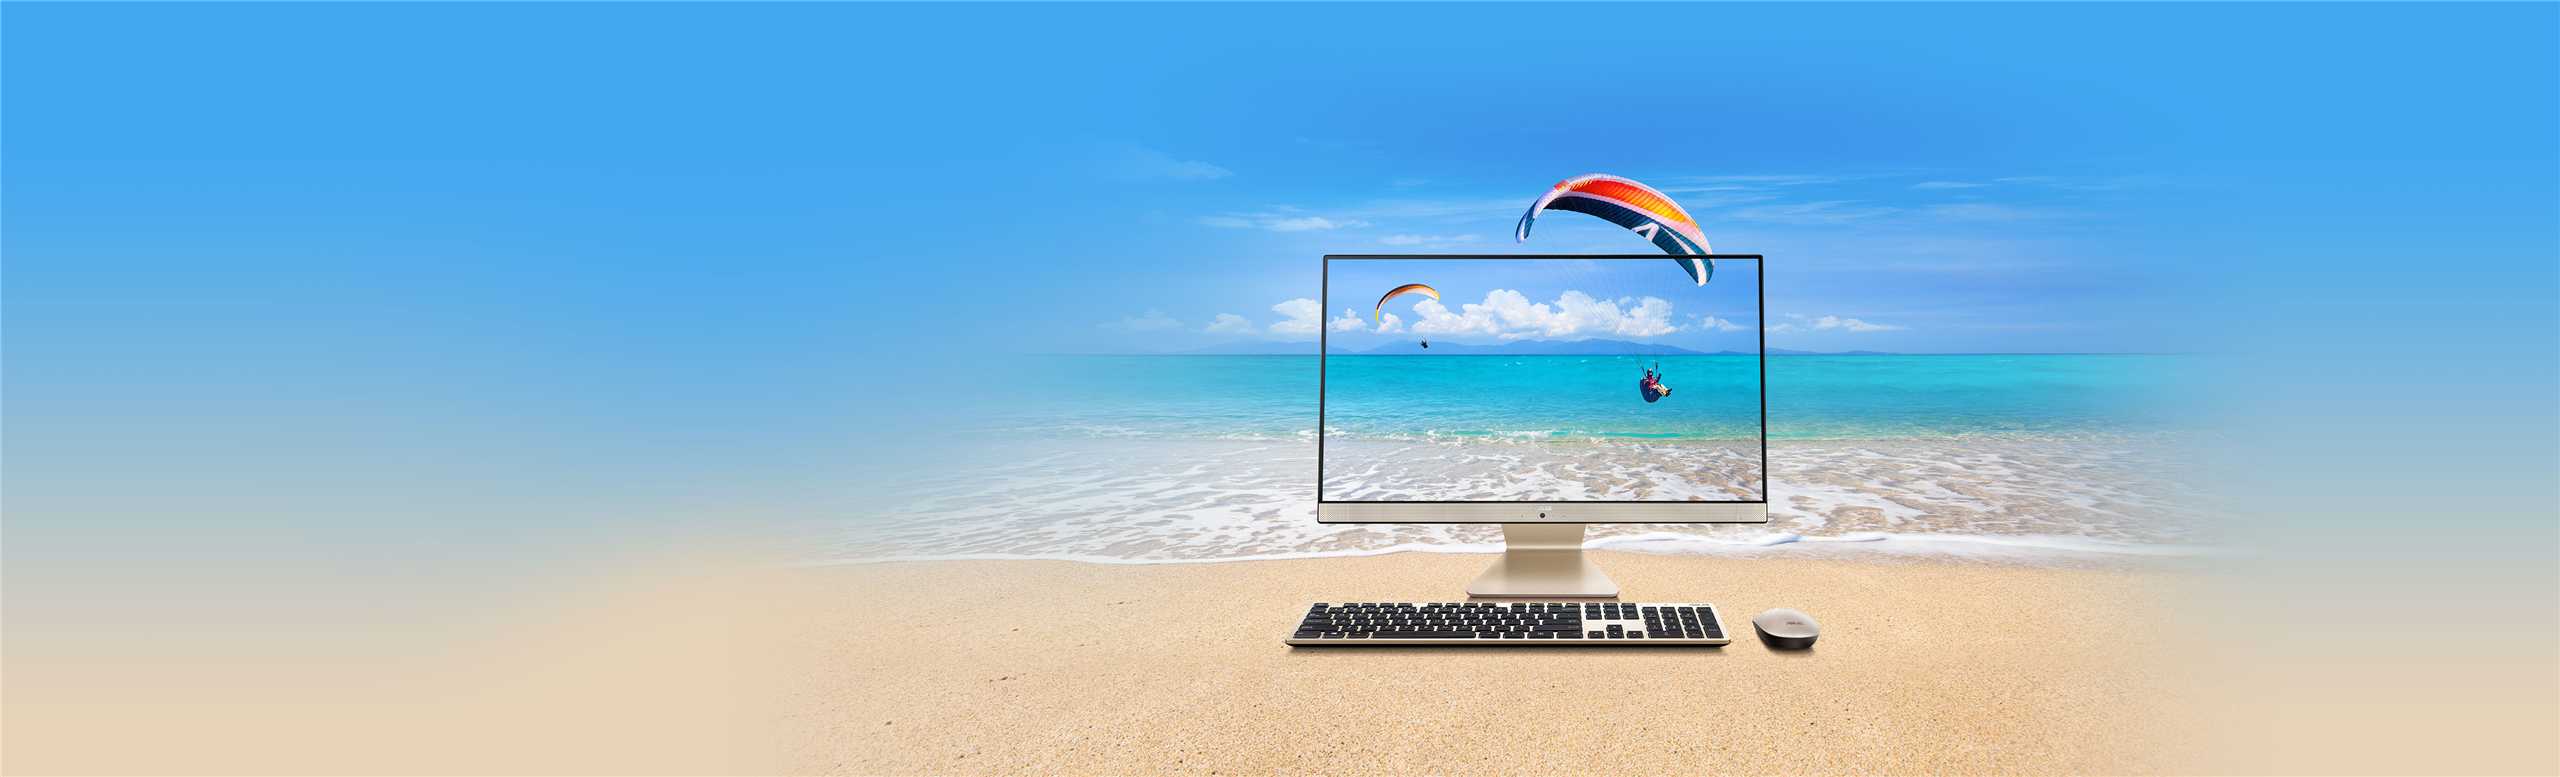 The ASUS AiO M241 display monitor with a keyboard and mouse in a beach setting with two parasailers in the background by the sandy water